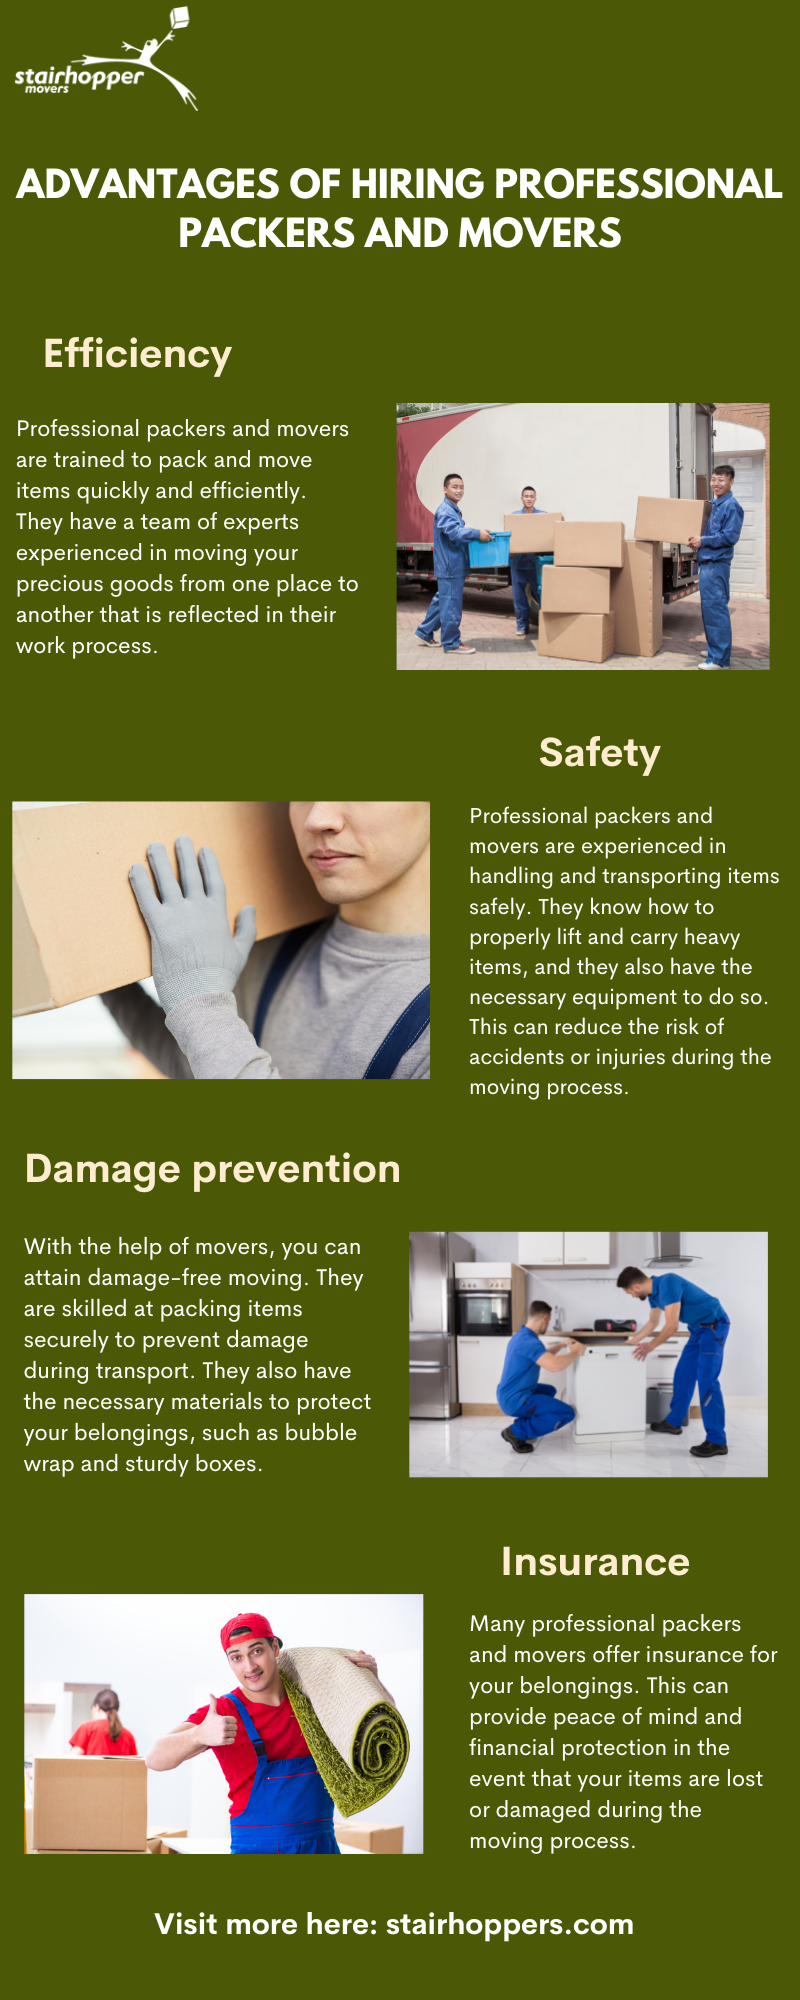 Advantages of Hiring Professional Packers and Movers - Social Social Social | Social Social Social